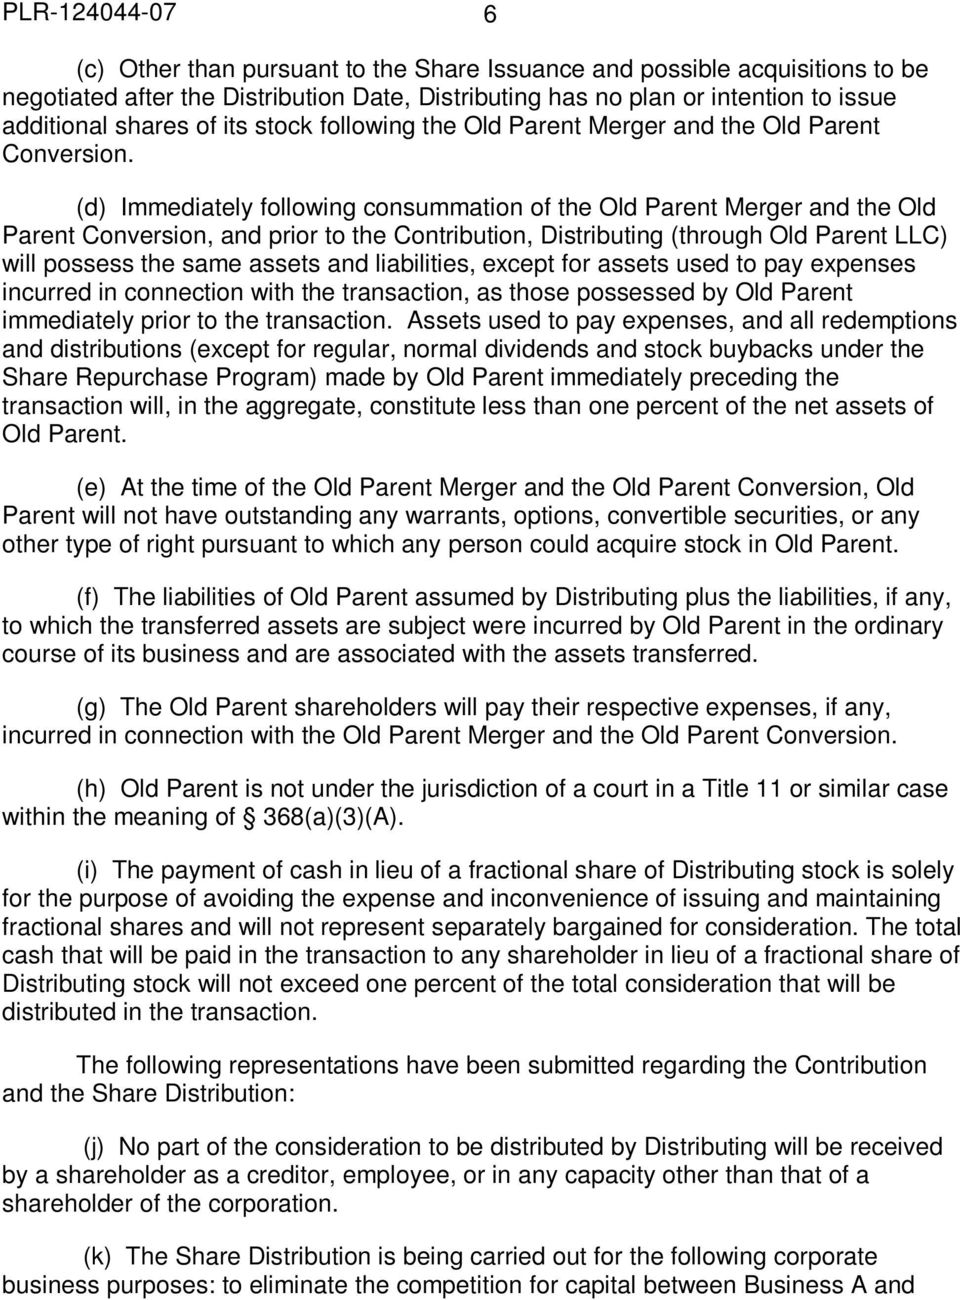 (d) Immediately following consummation of the Old Parent Merger and the Old Parent Conversion, and prior to the Contribution, Distributing (through Old Parent LLC) will possess the same assets and